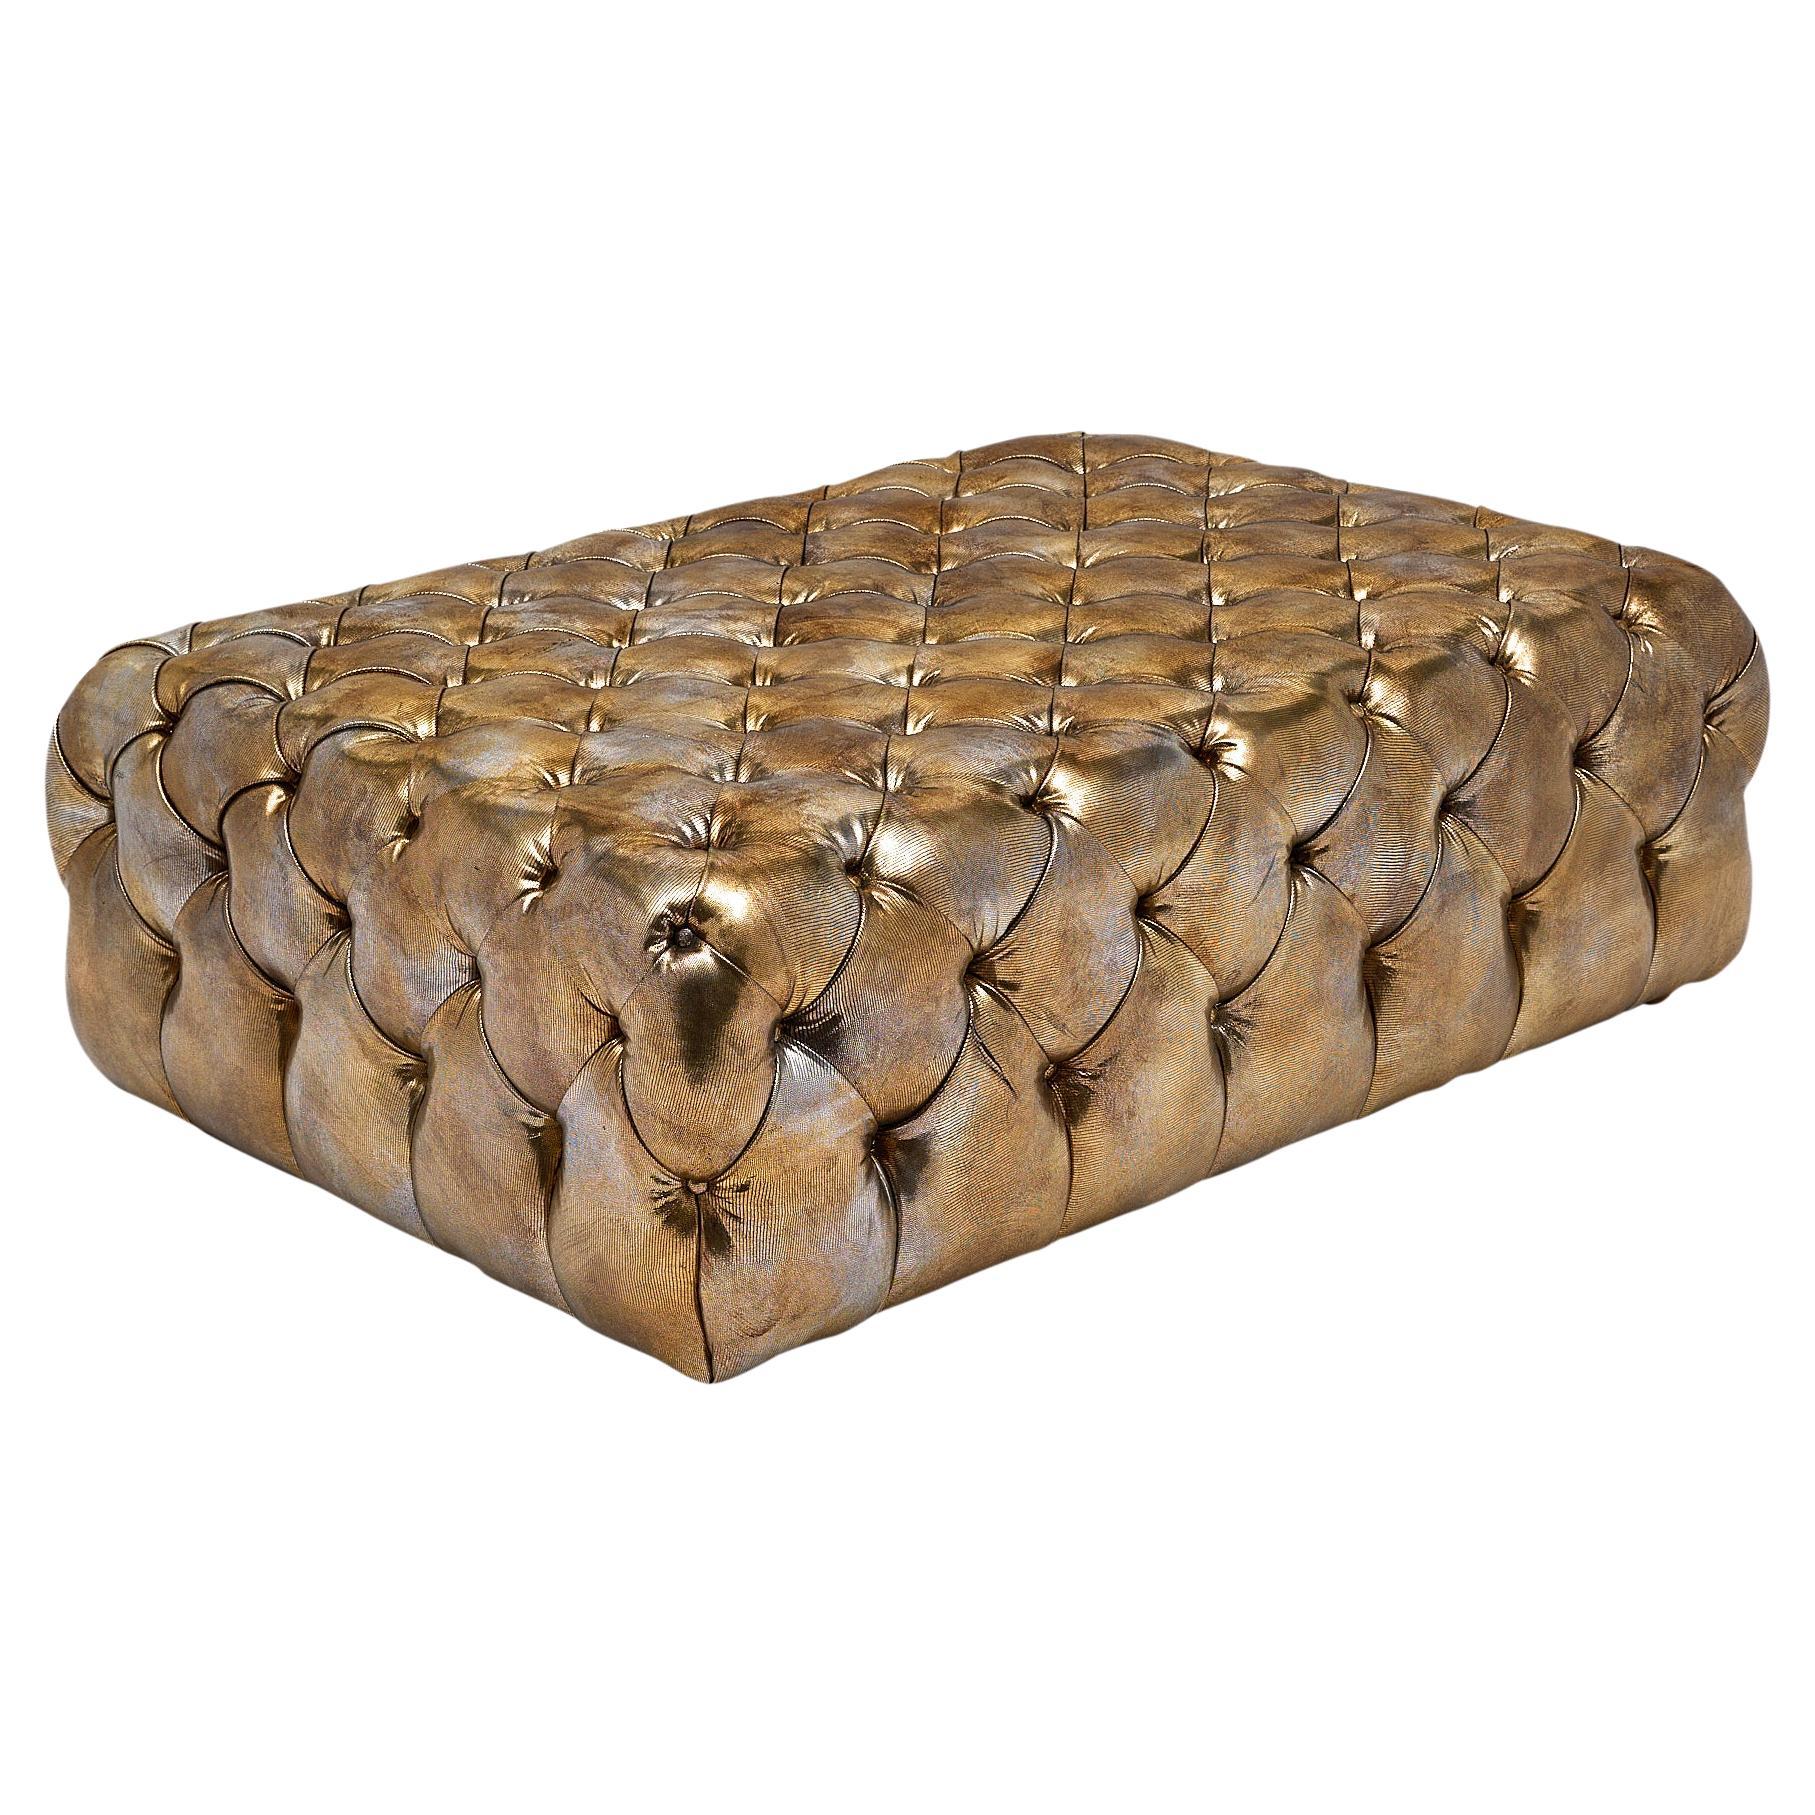 Italian Gold Leather Chesterfield Ottoman/Bench